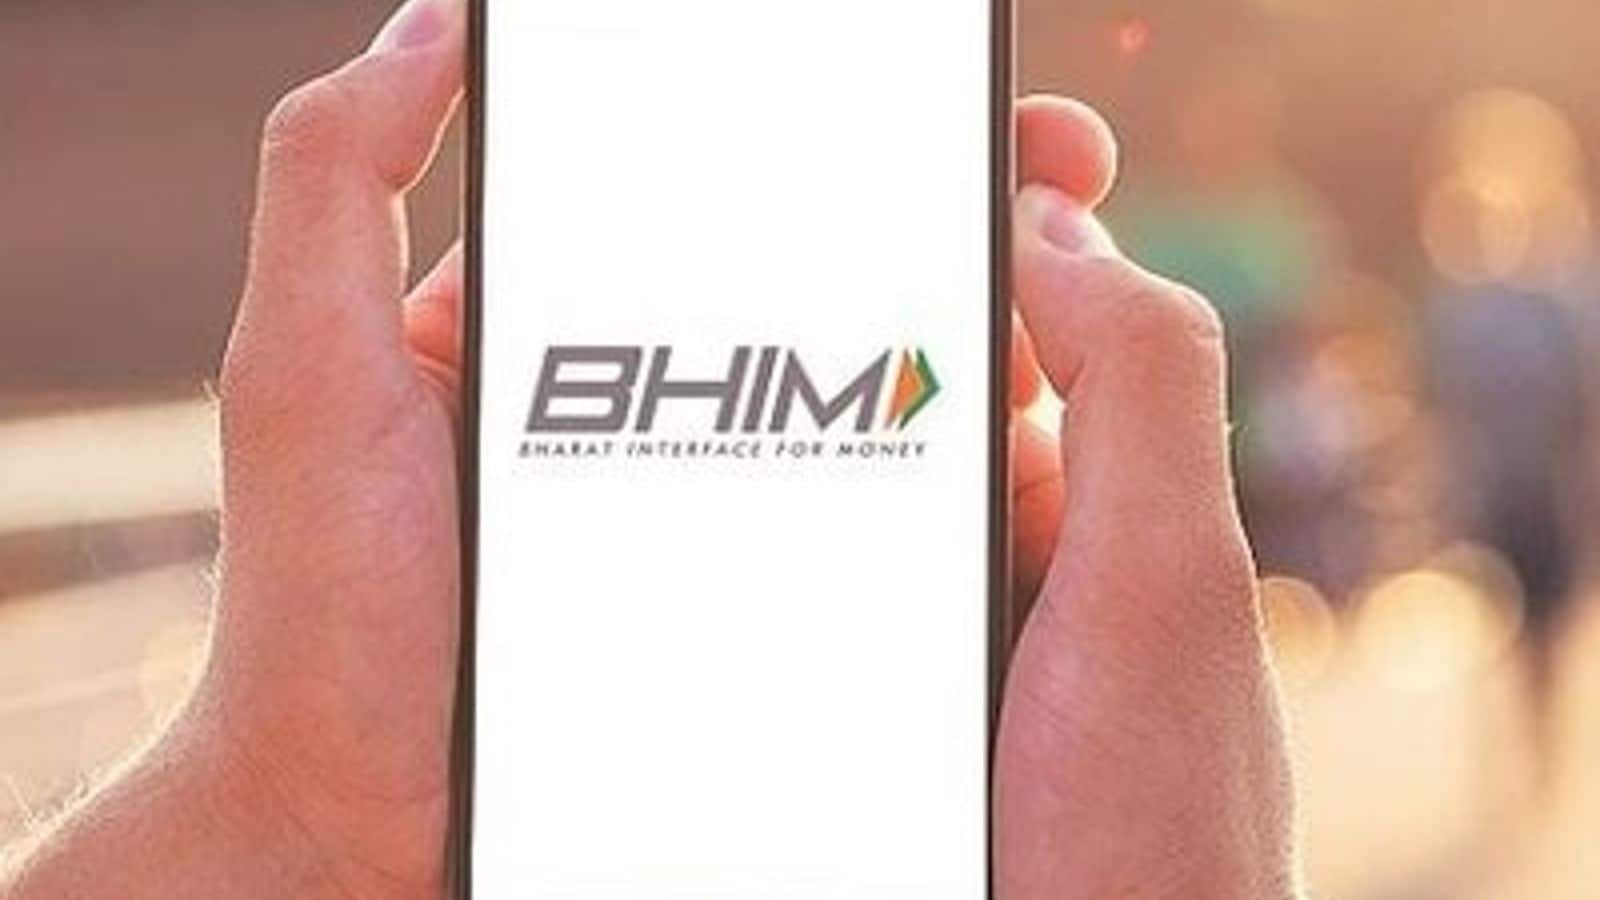 BHIM planning to dive into e-commerce sector via ONDC